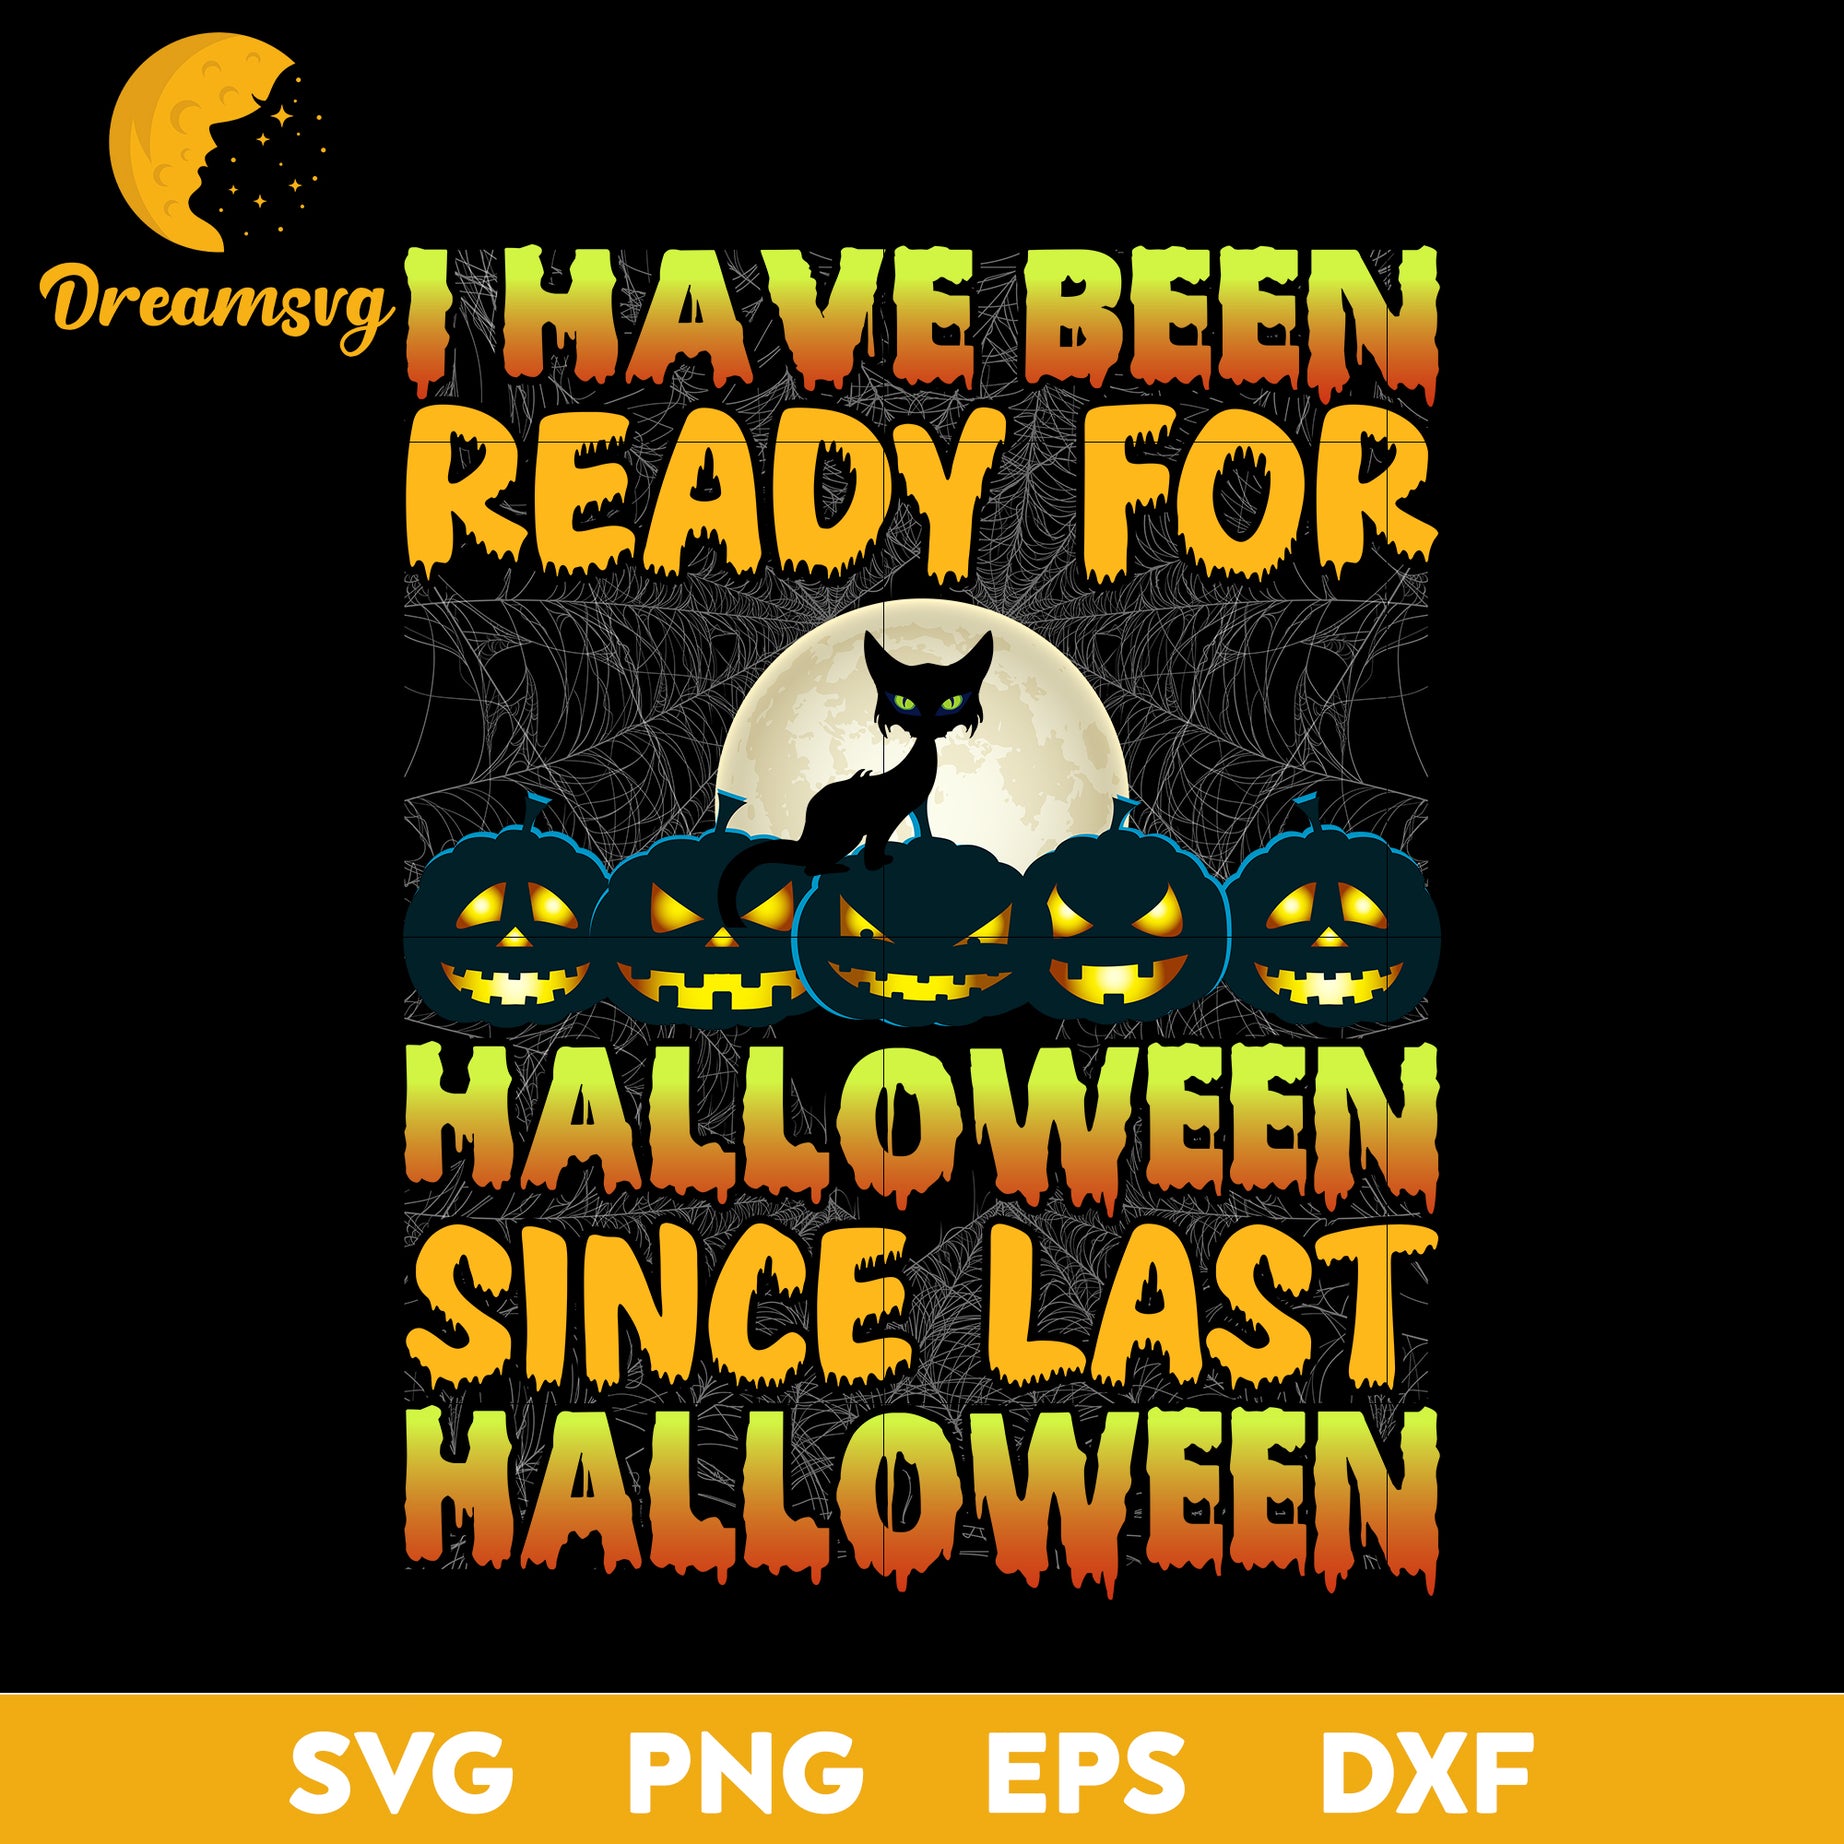 I have been ready for hallween since last halloween svg, Halloween svg, png, dxf, eps digital file.